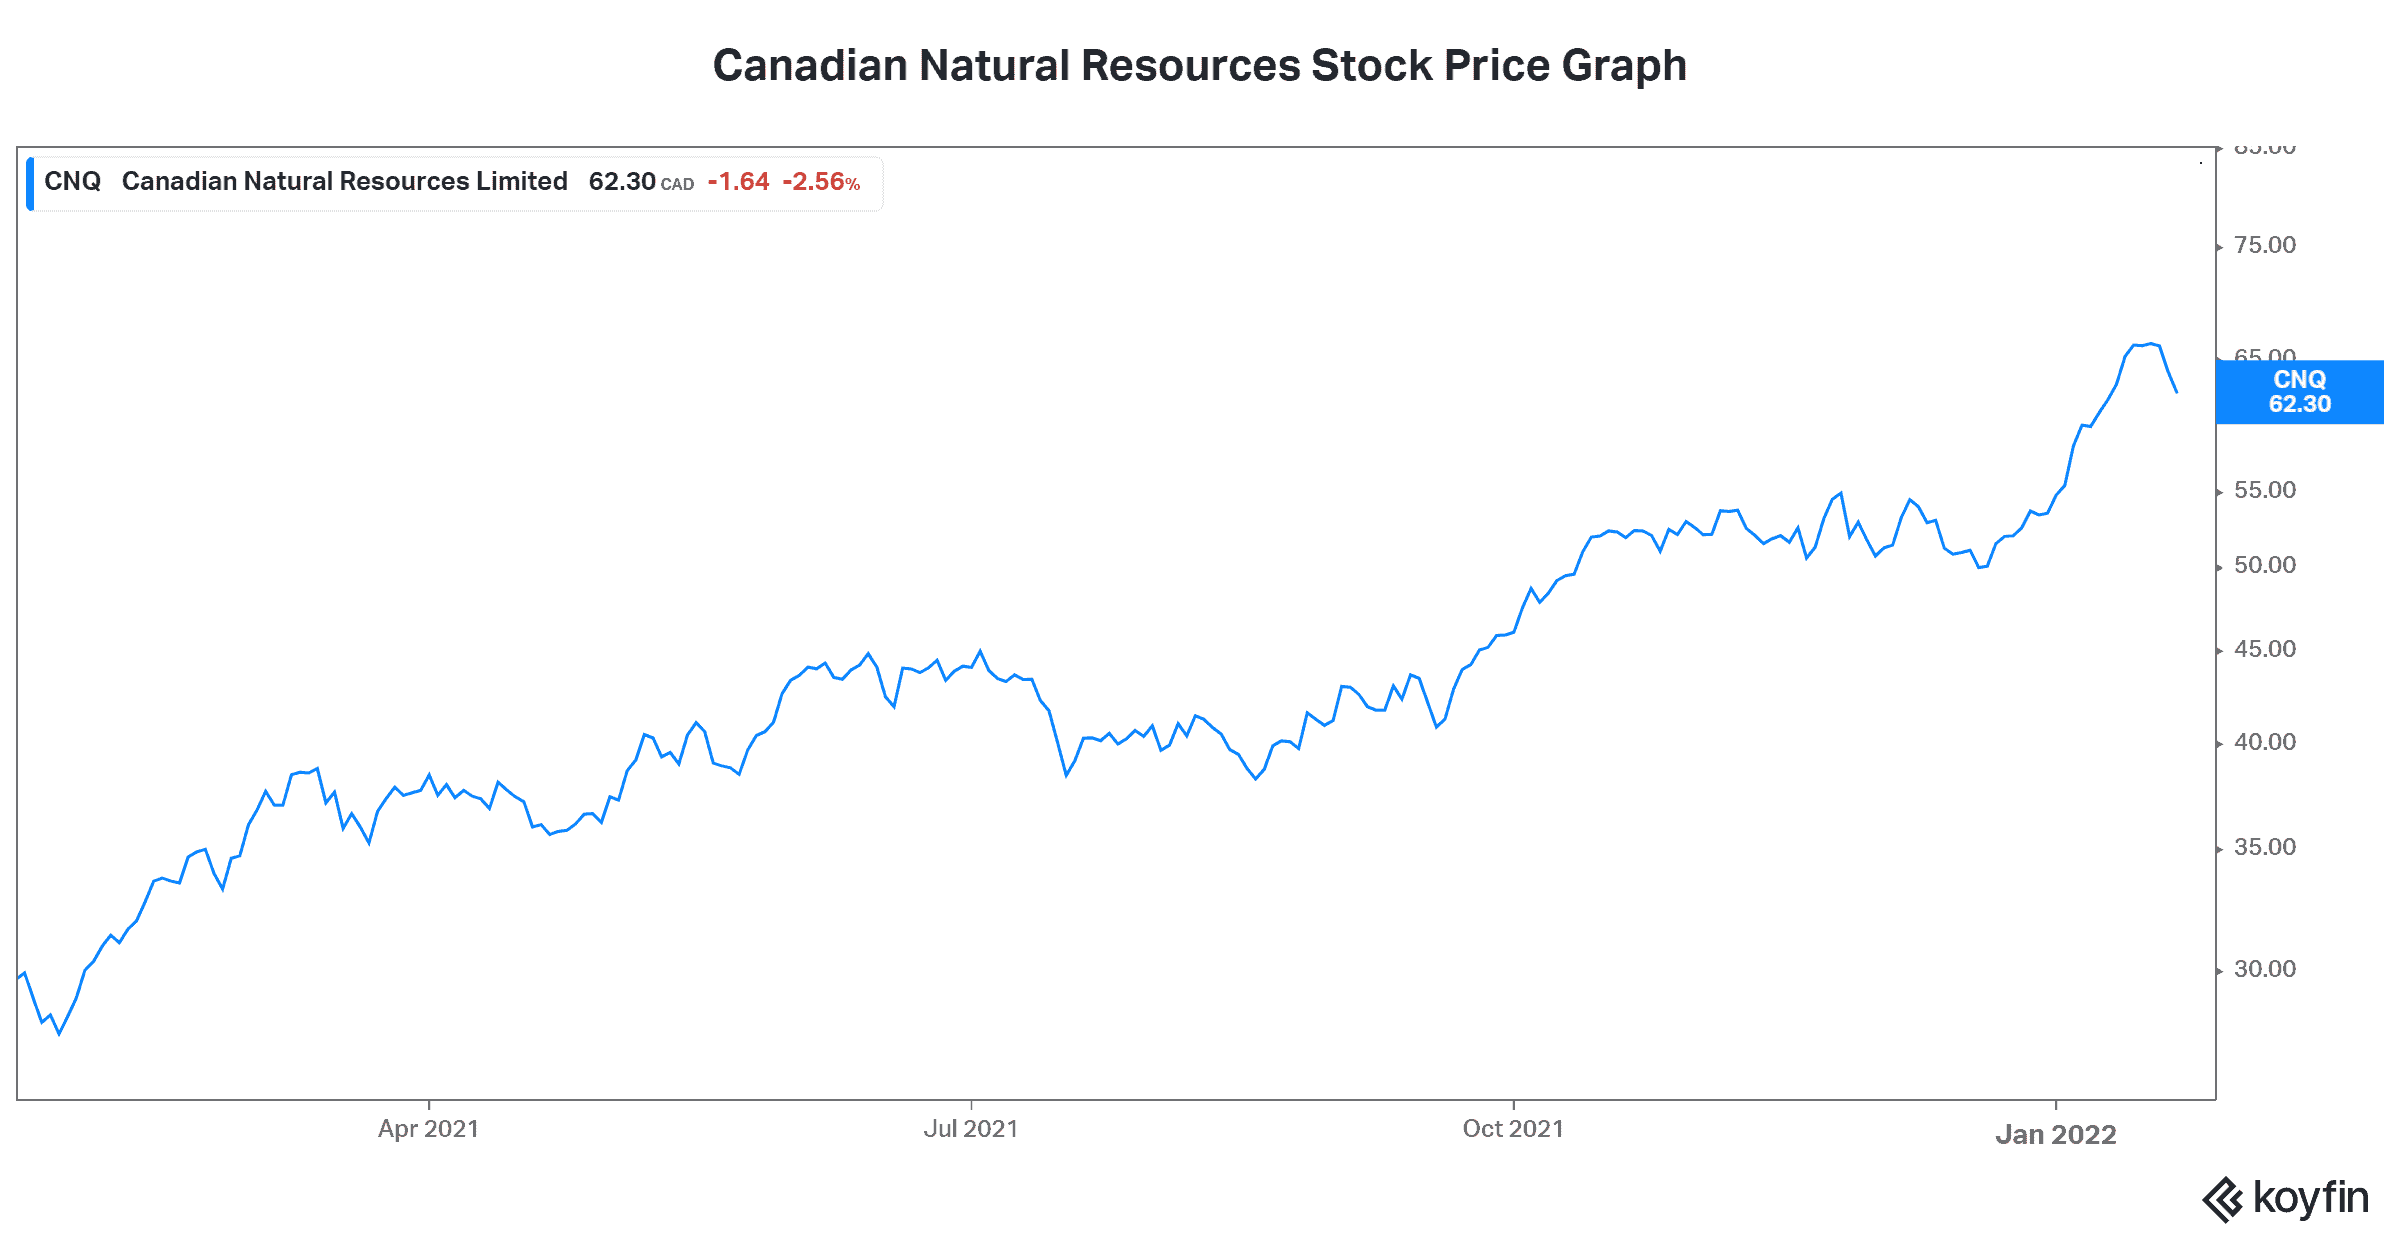 Energy stock Canadian Natural Resources stock